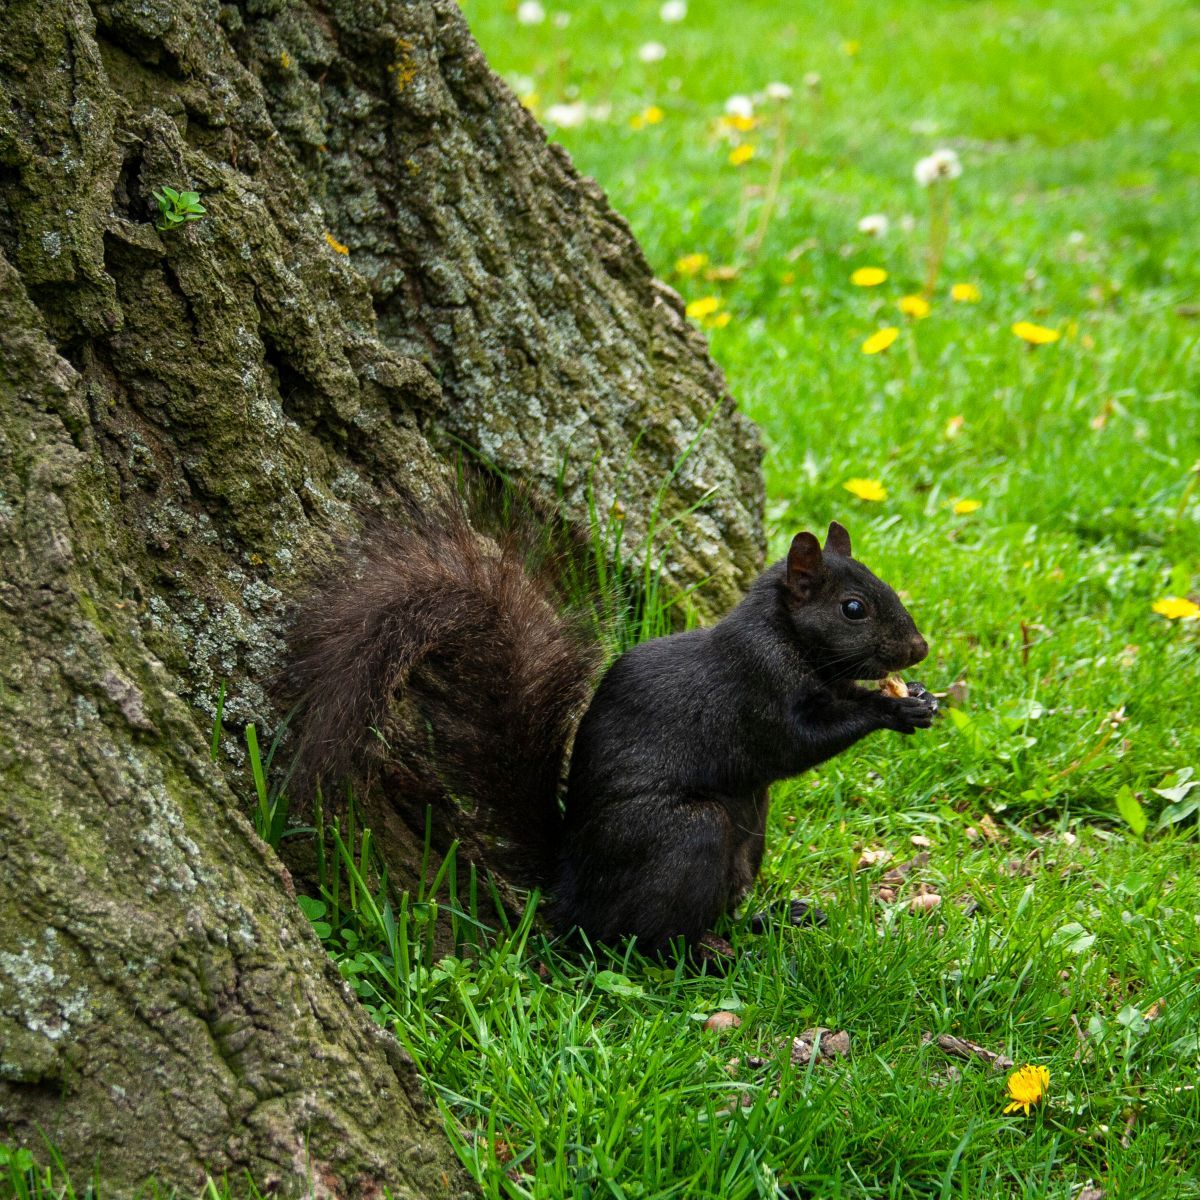 meaning of black squirrel